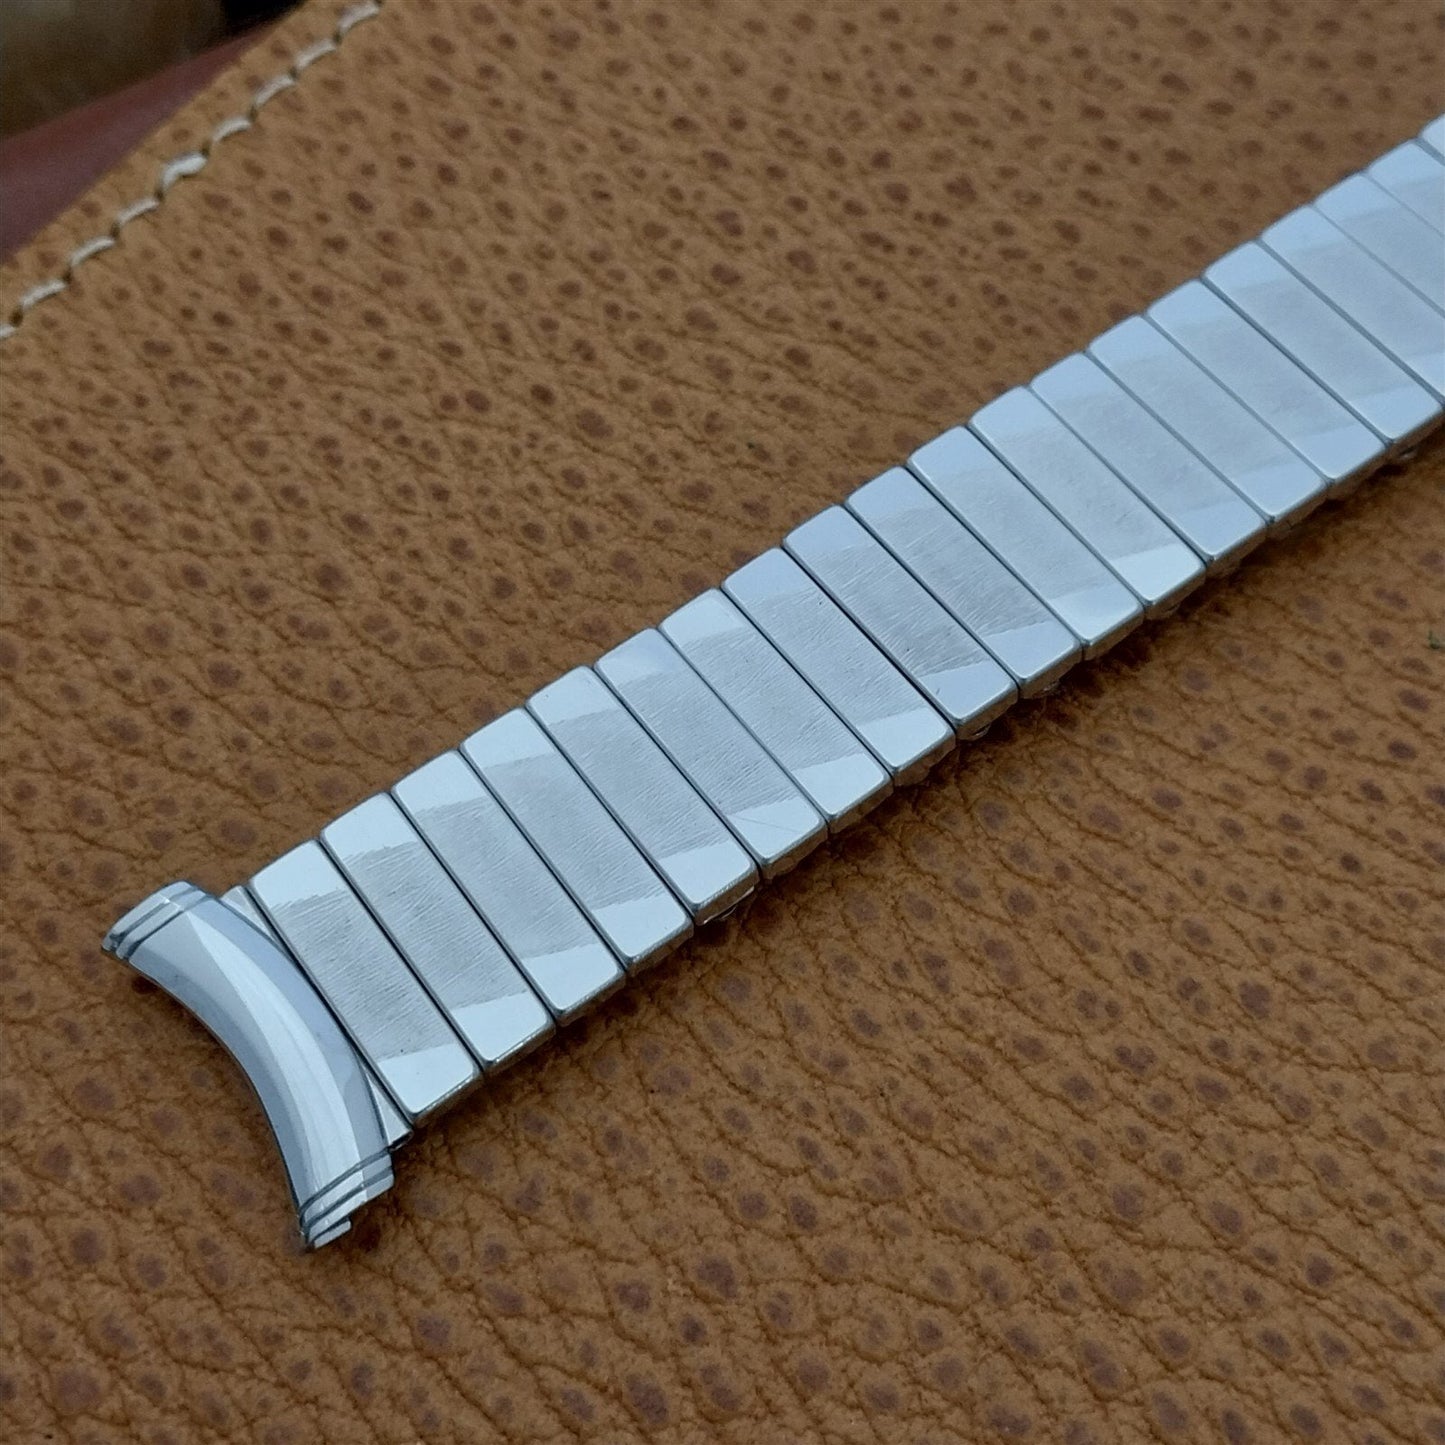 19mm 18mm 16mm White Gold-Filled Classic Kreisler nos 1960s Vintage Watch Band